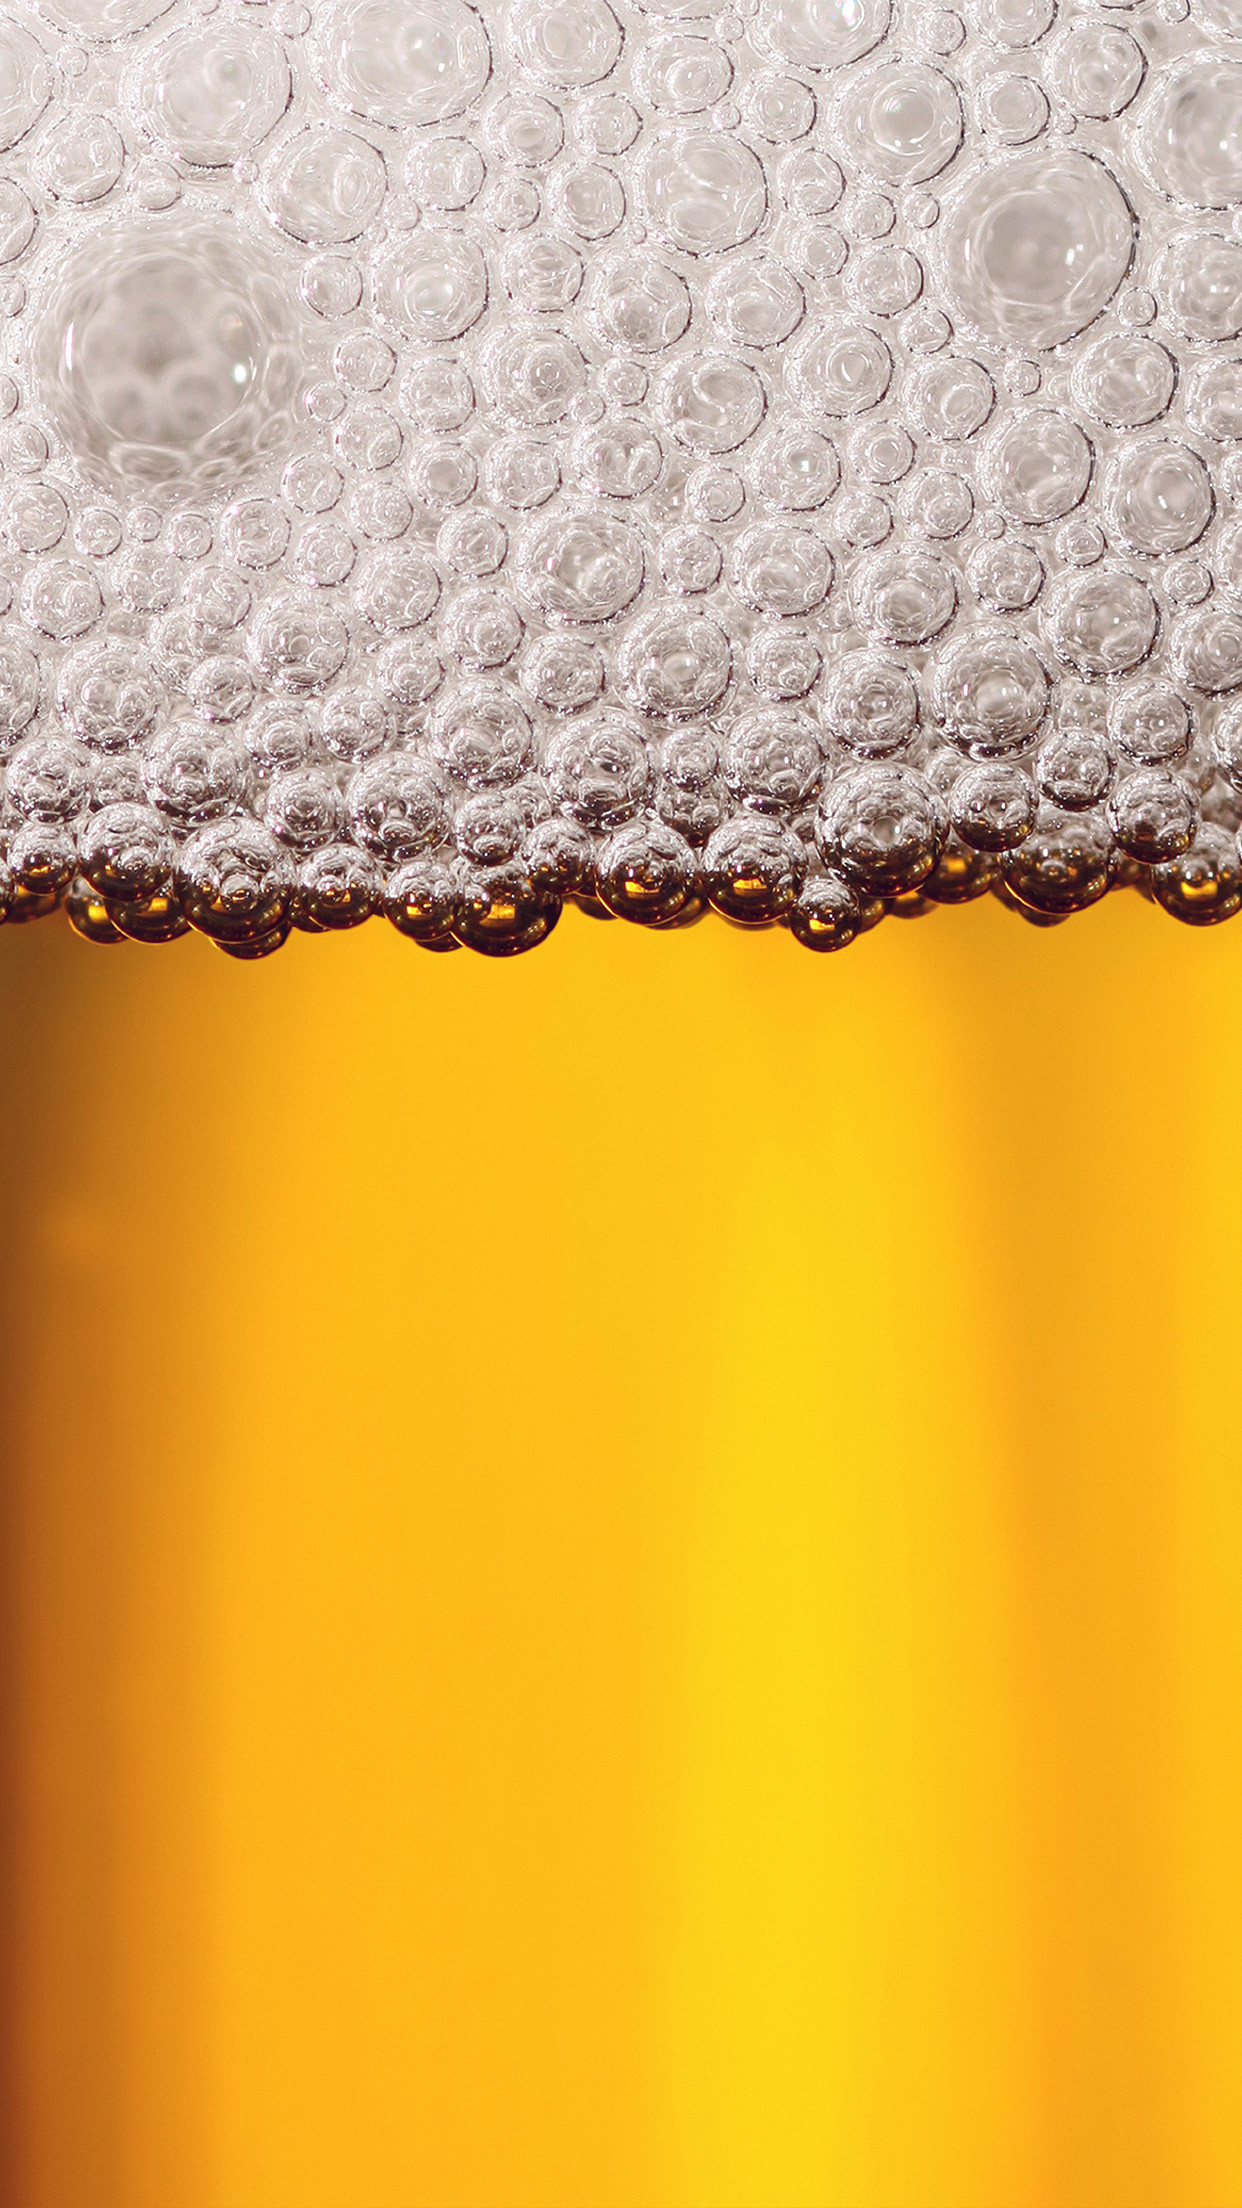 Glass Of Beer Foam Bubbles Close Up iPhone 6+ HD Wallpaper